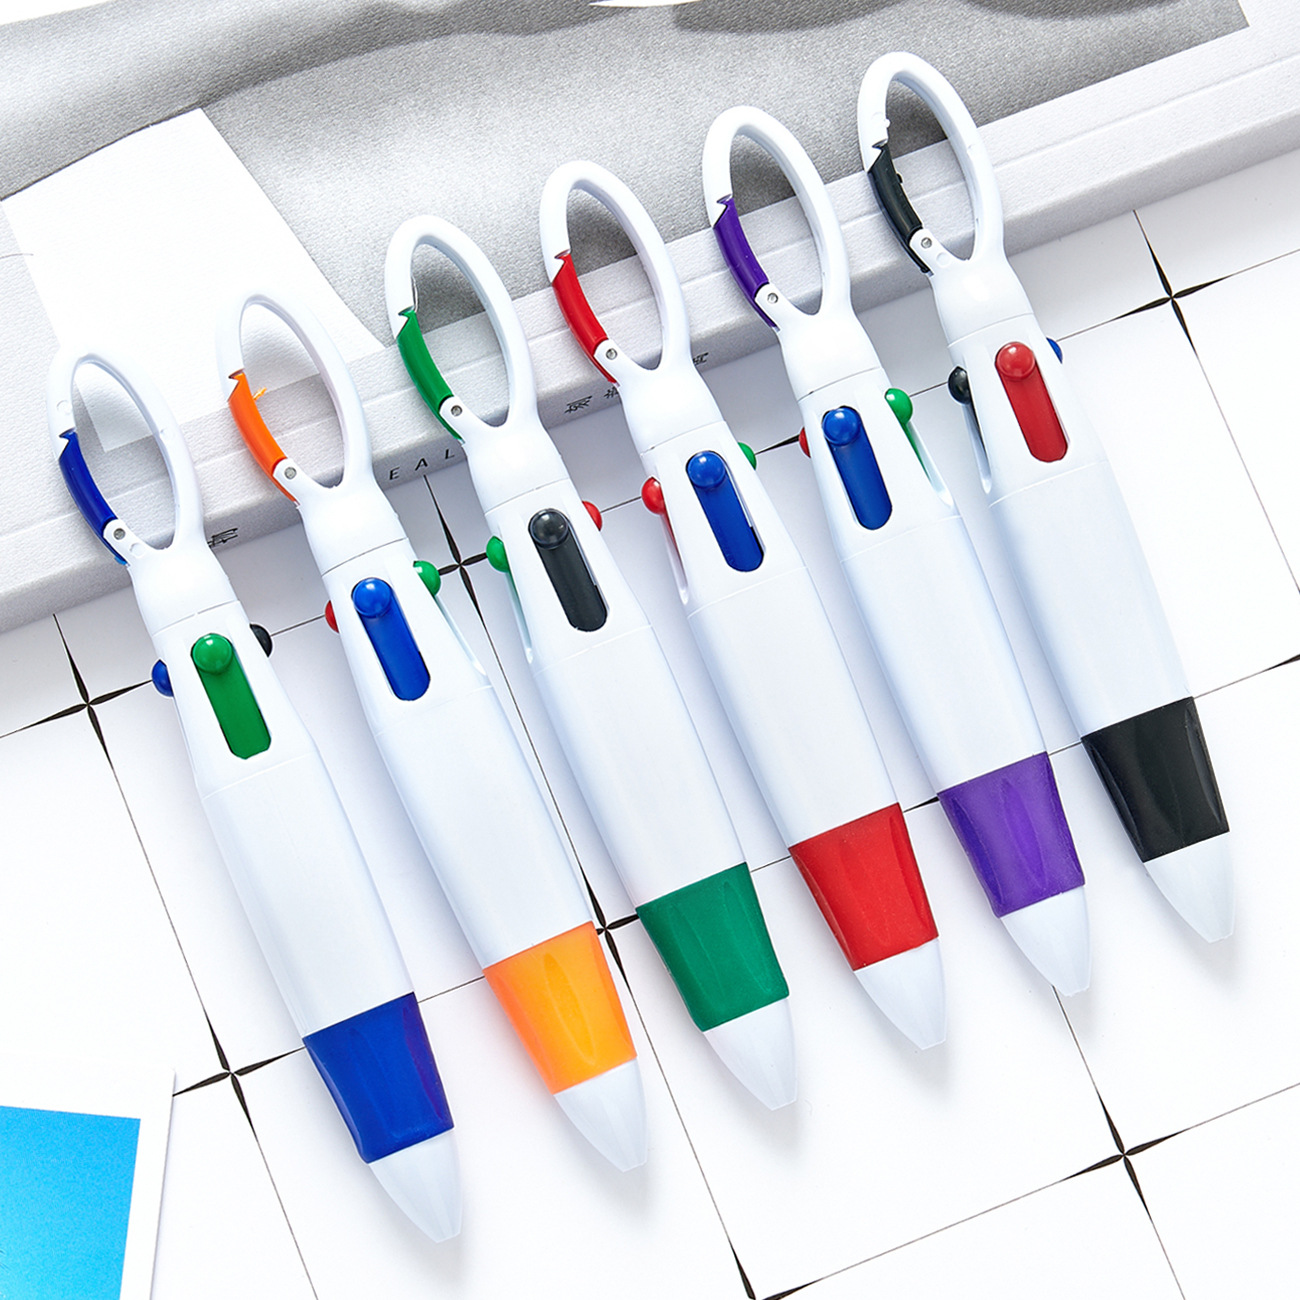 Carabiner Four-color Plastic Ballpoint Pen from $0.73